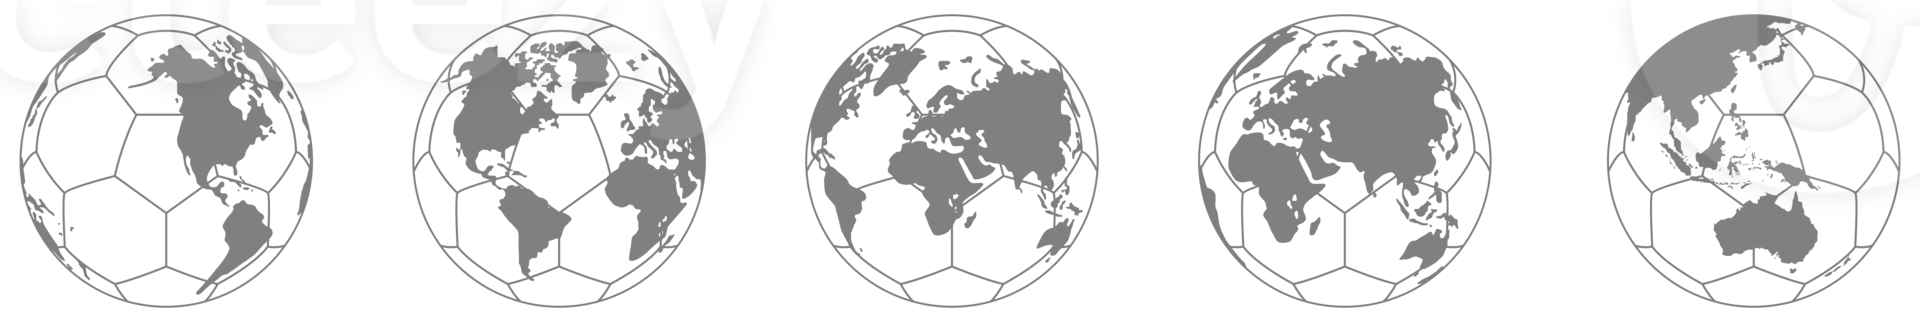 World Map on the Foot Ball Silhouette for Icon, Symbol, Pictogram, Sport News, Art Illustration, Apps, Website or Graphic Design Element. Format PNG